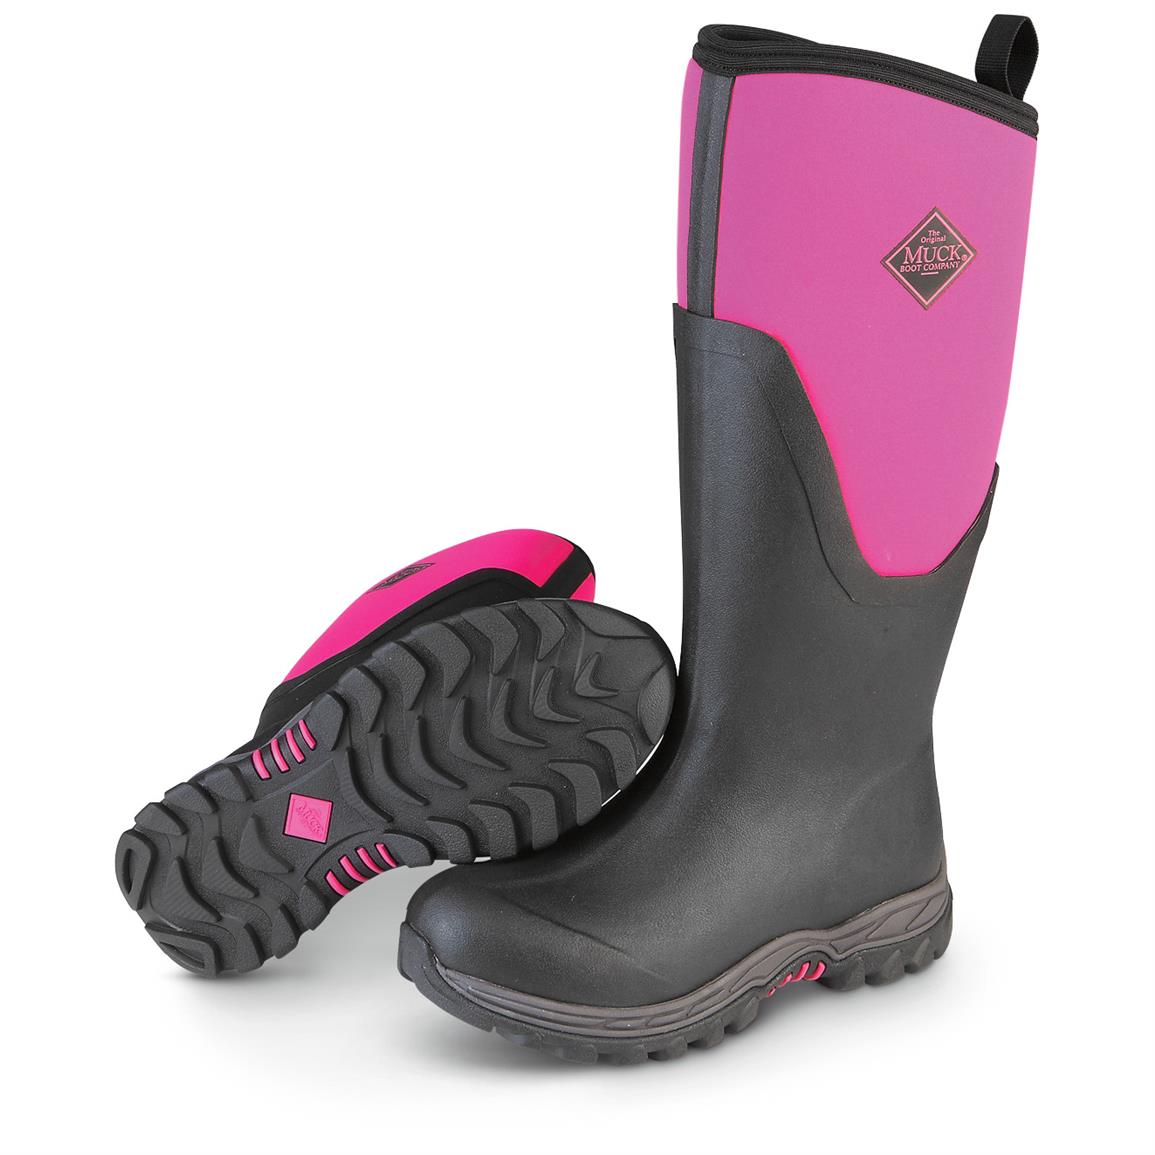 Buy > womens muck snow boots > in stock